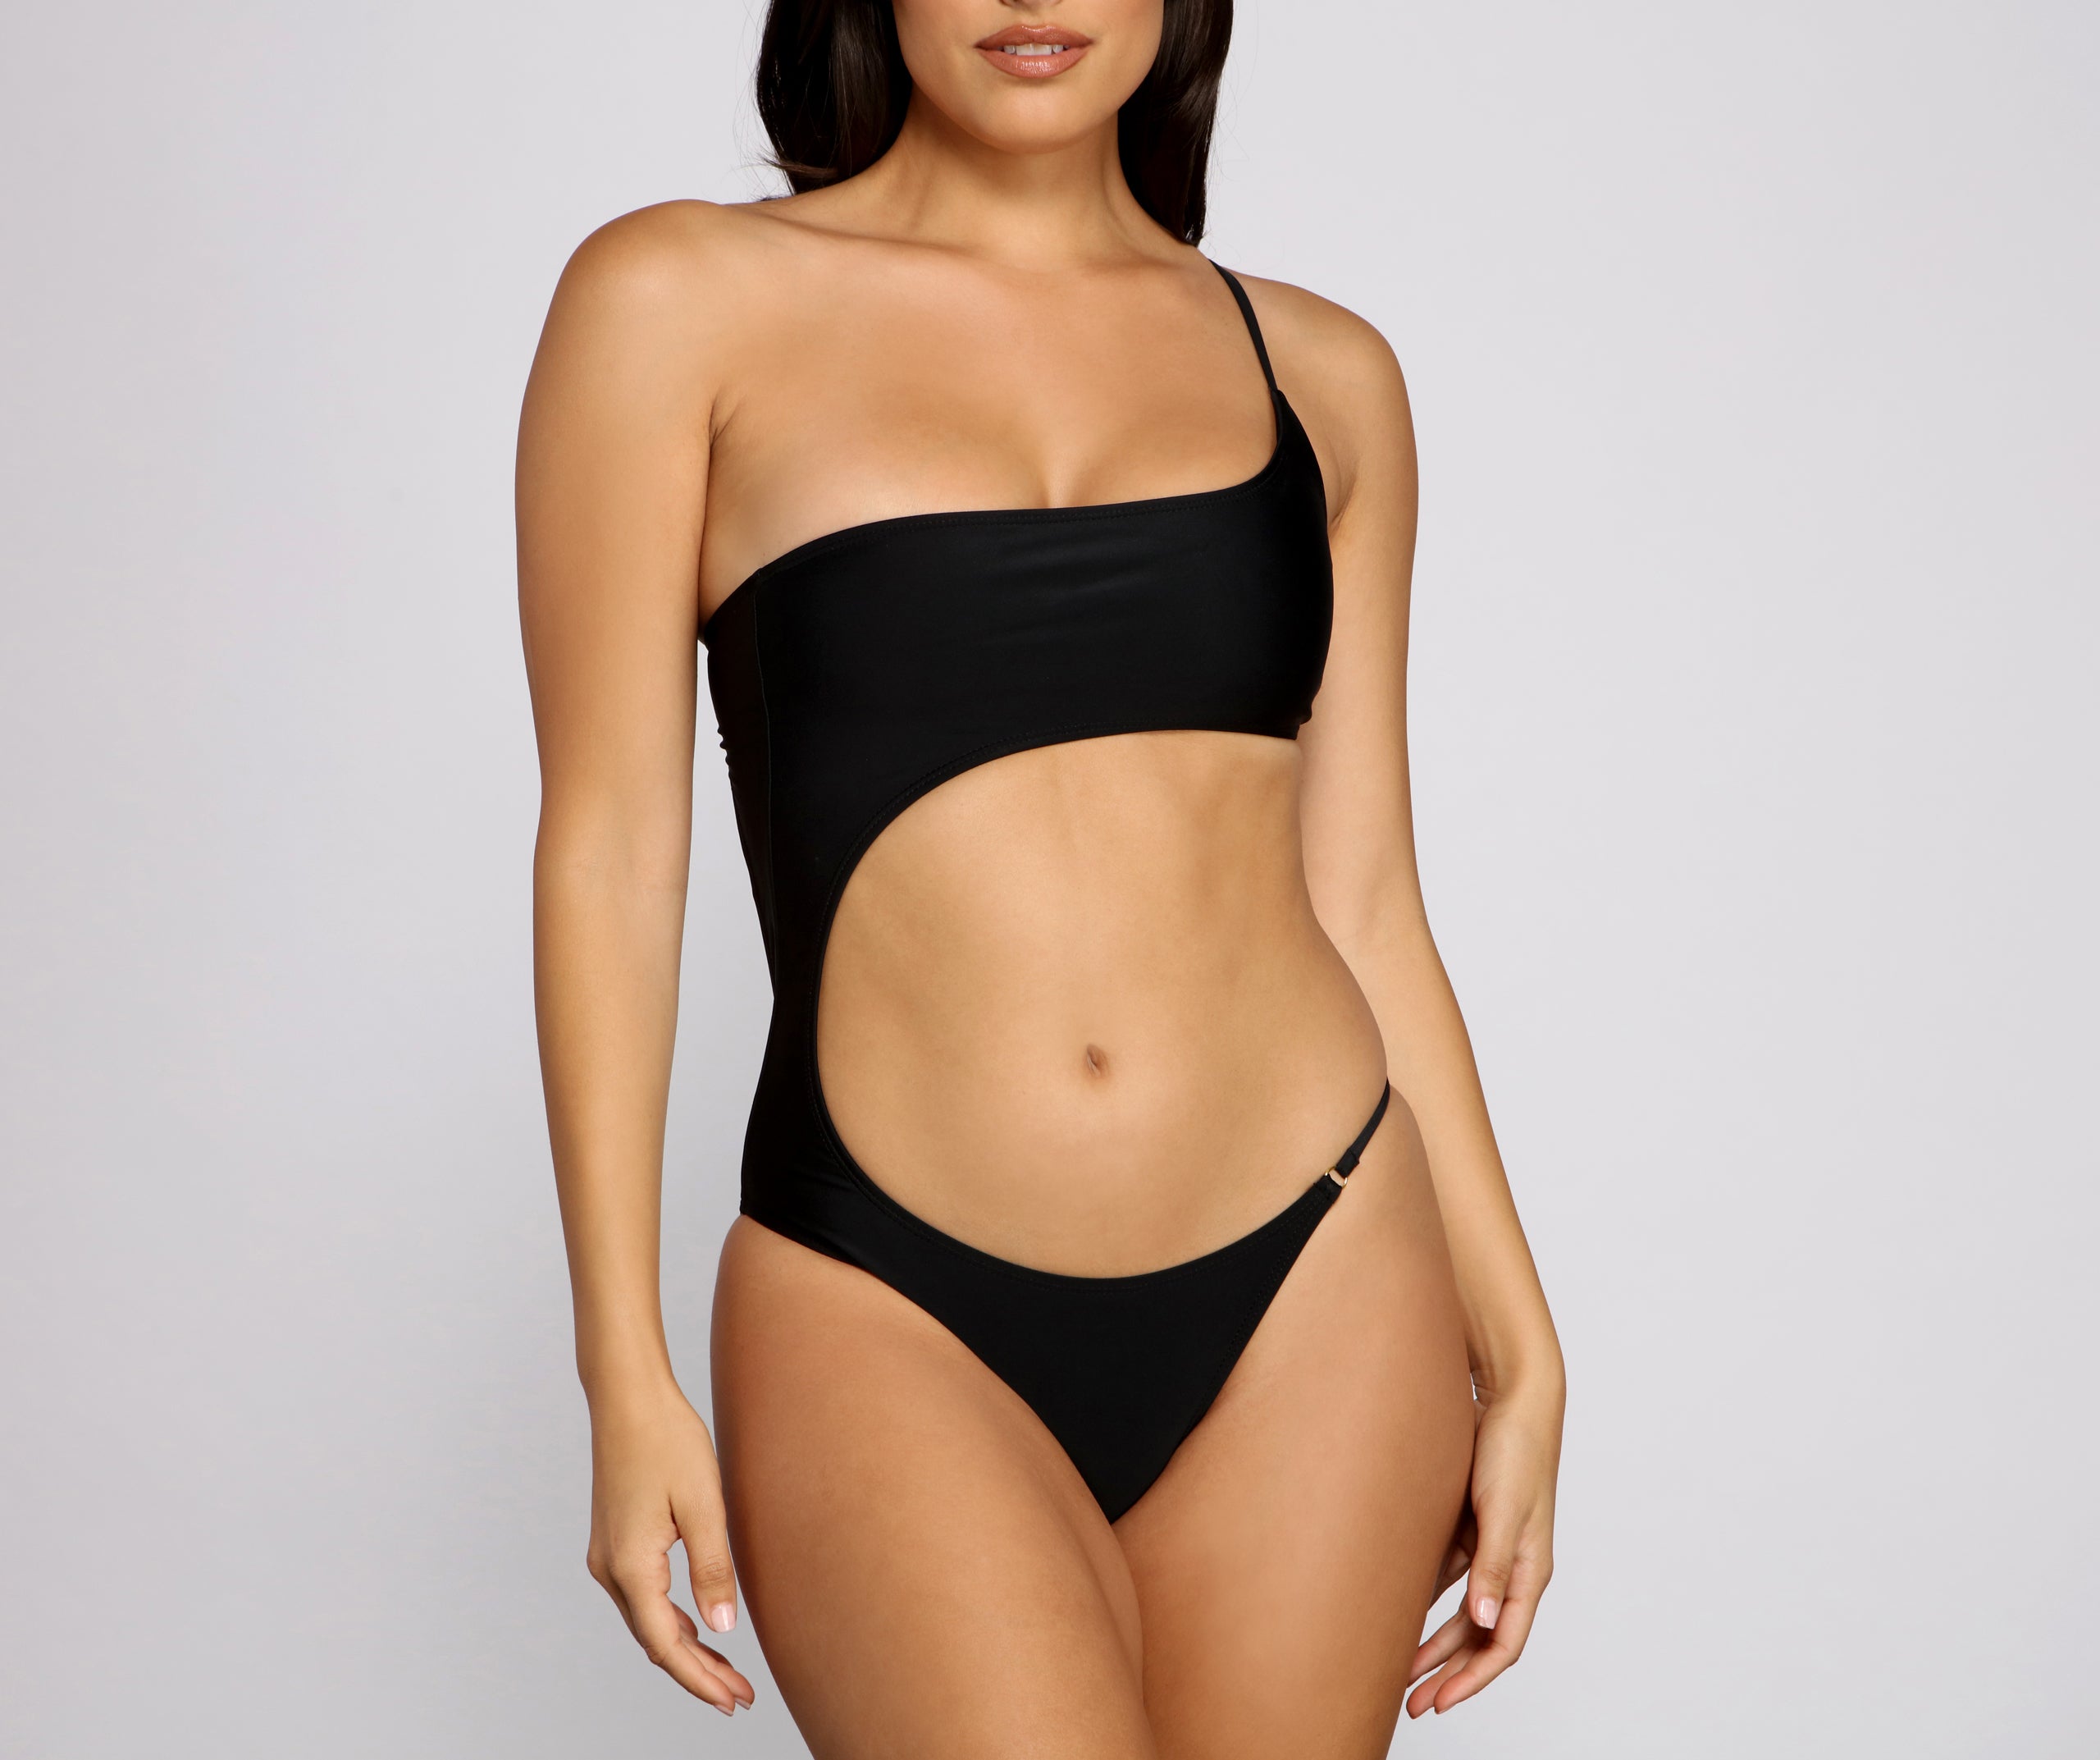 So Stunning One Shoulder One Piece Swimsuit